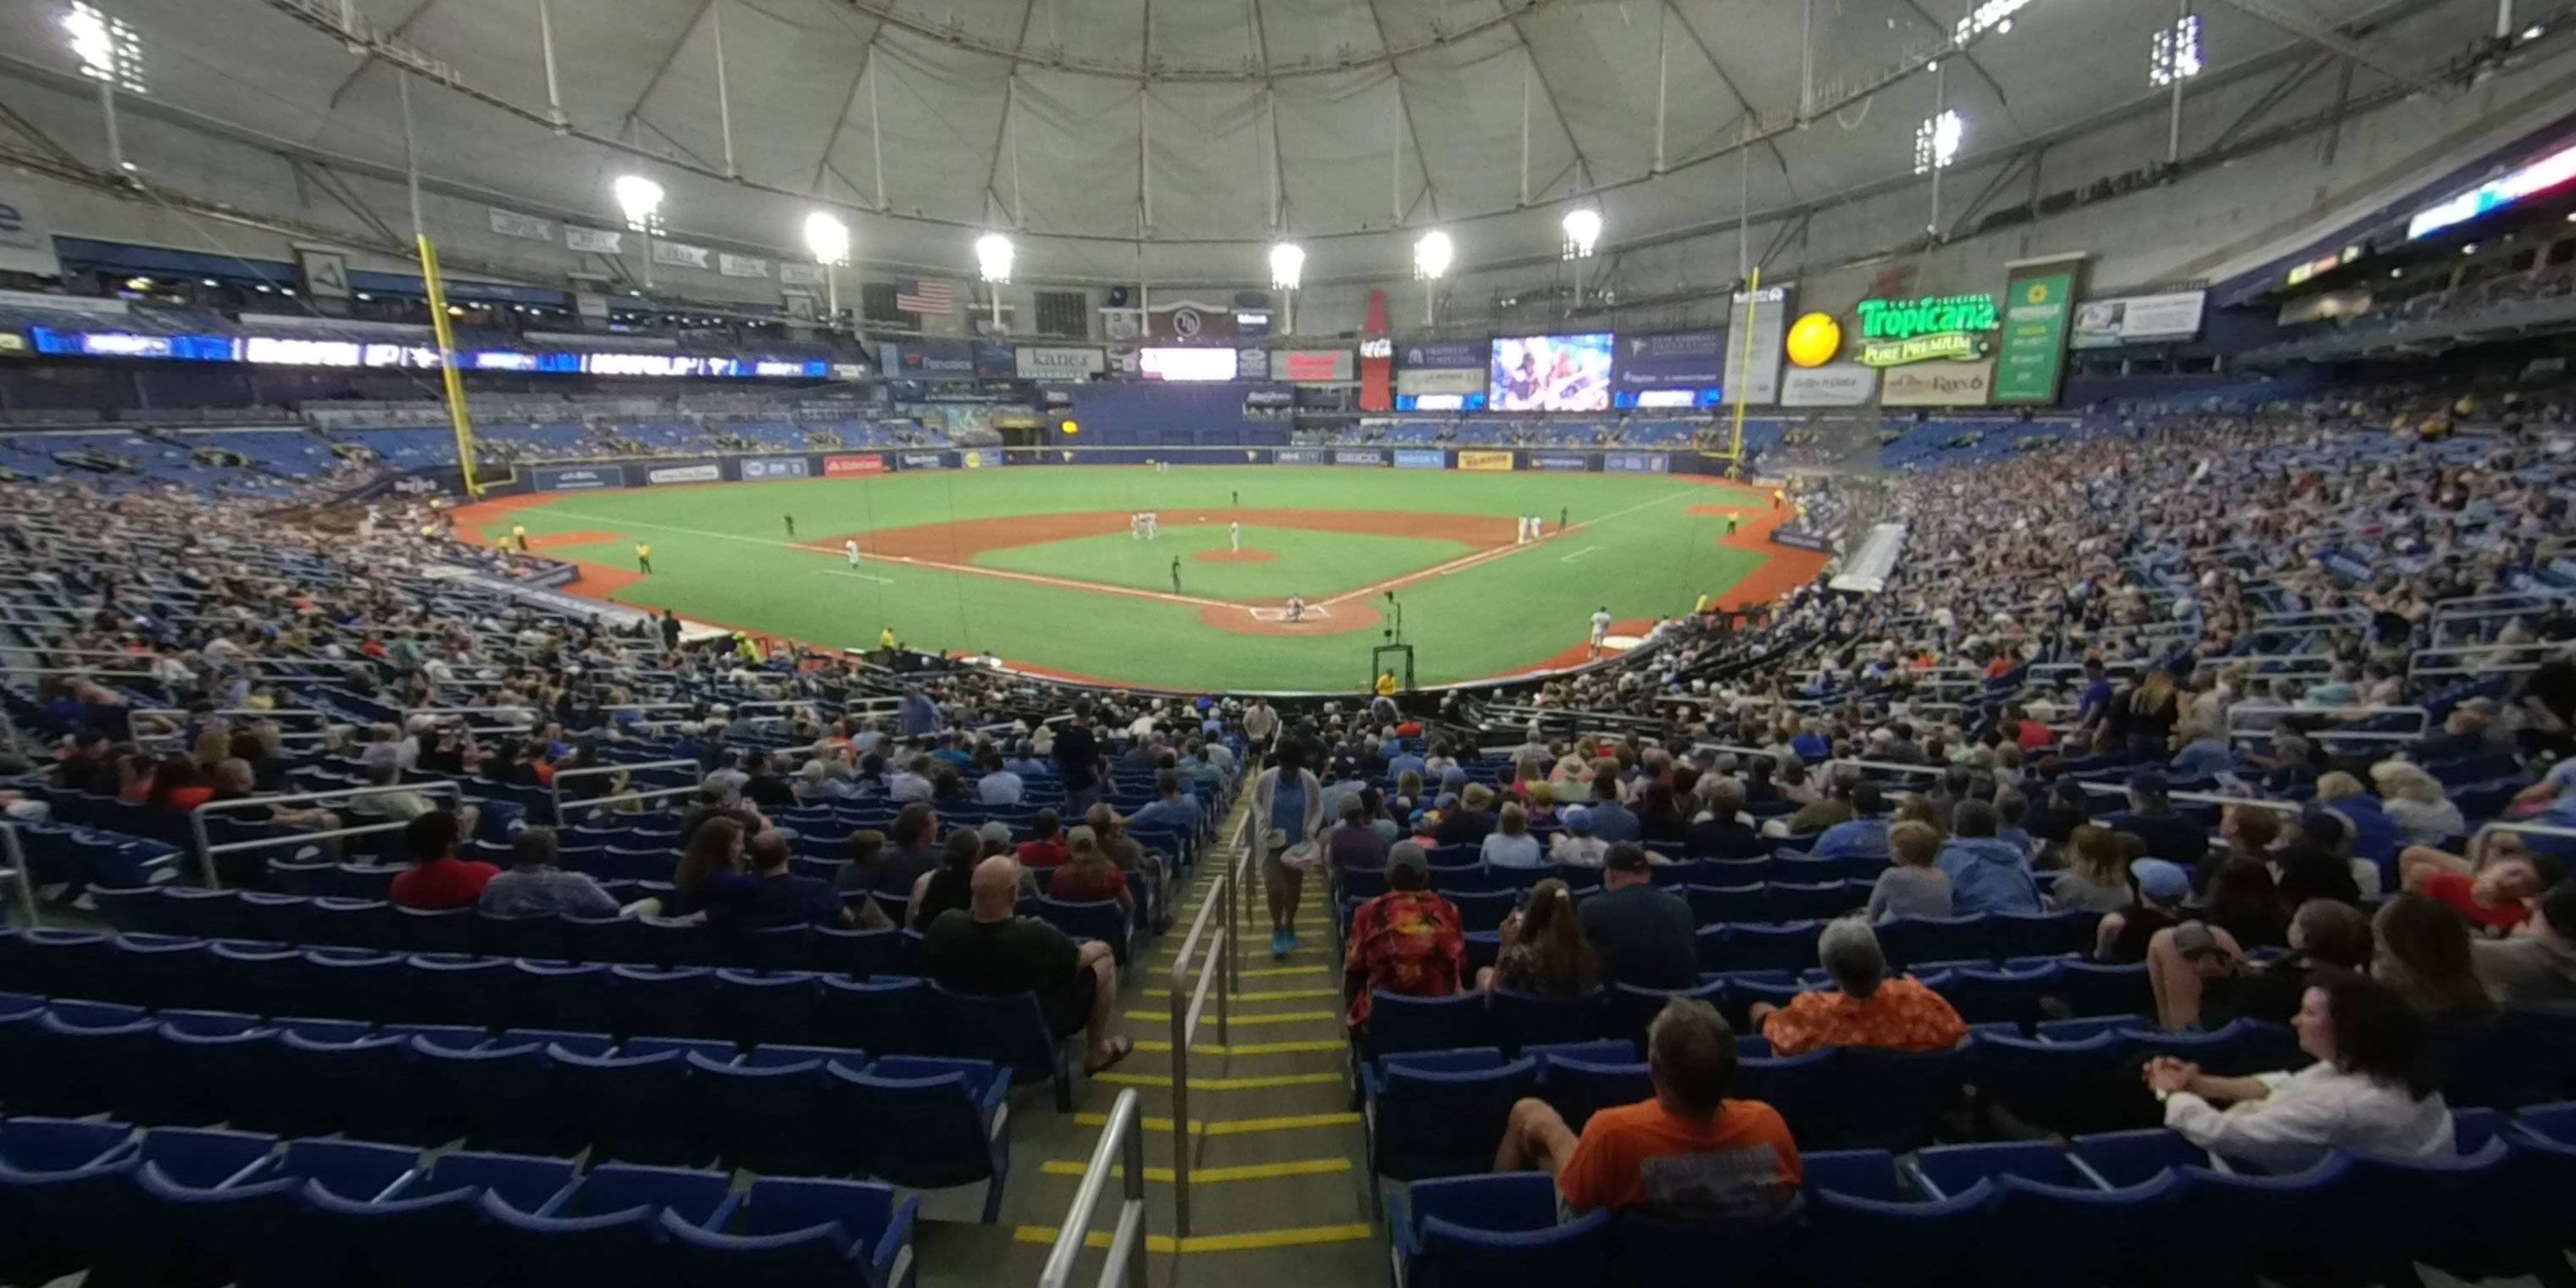 section 103 panoramic seat view  for baseball - tropicana field